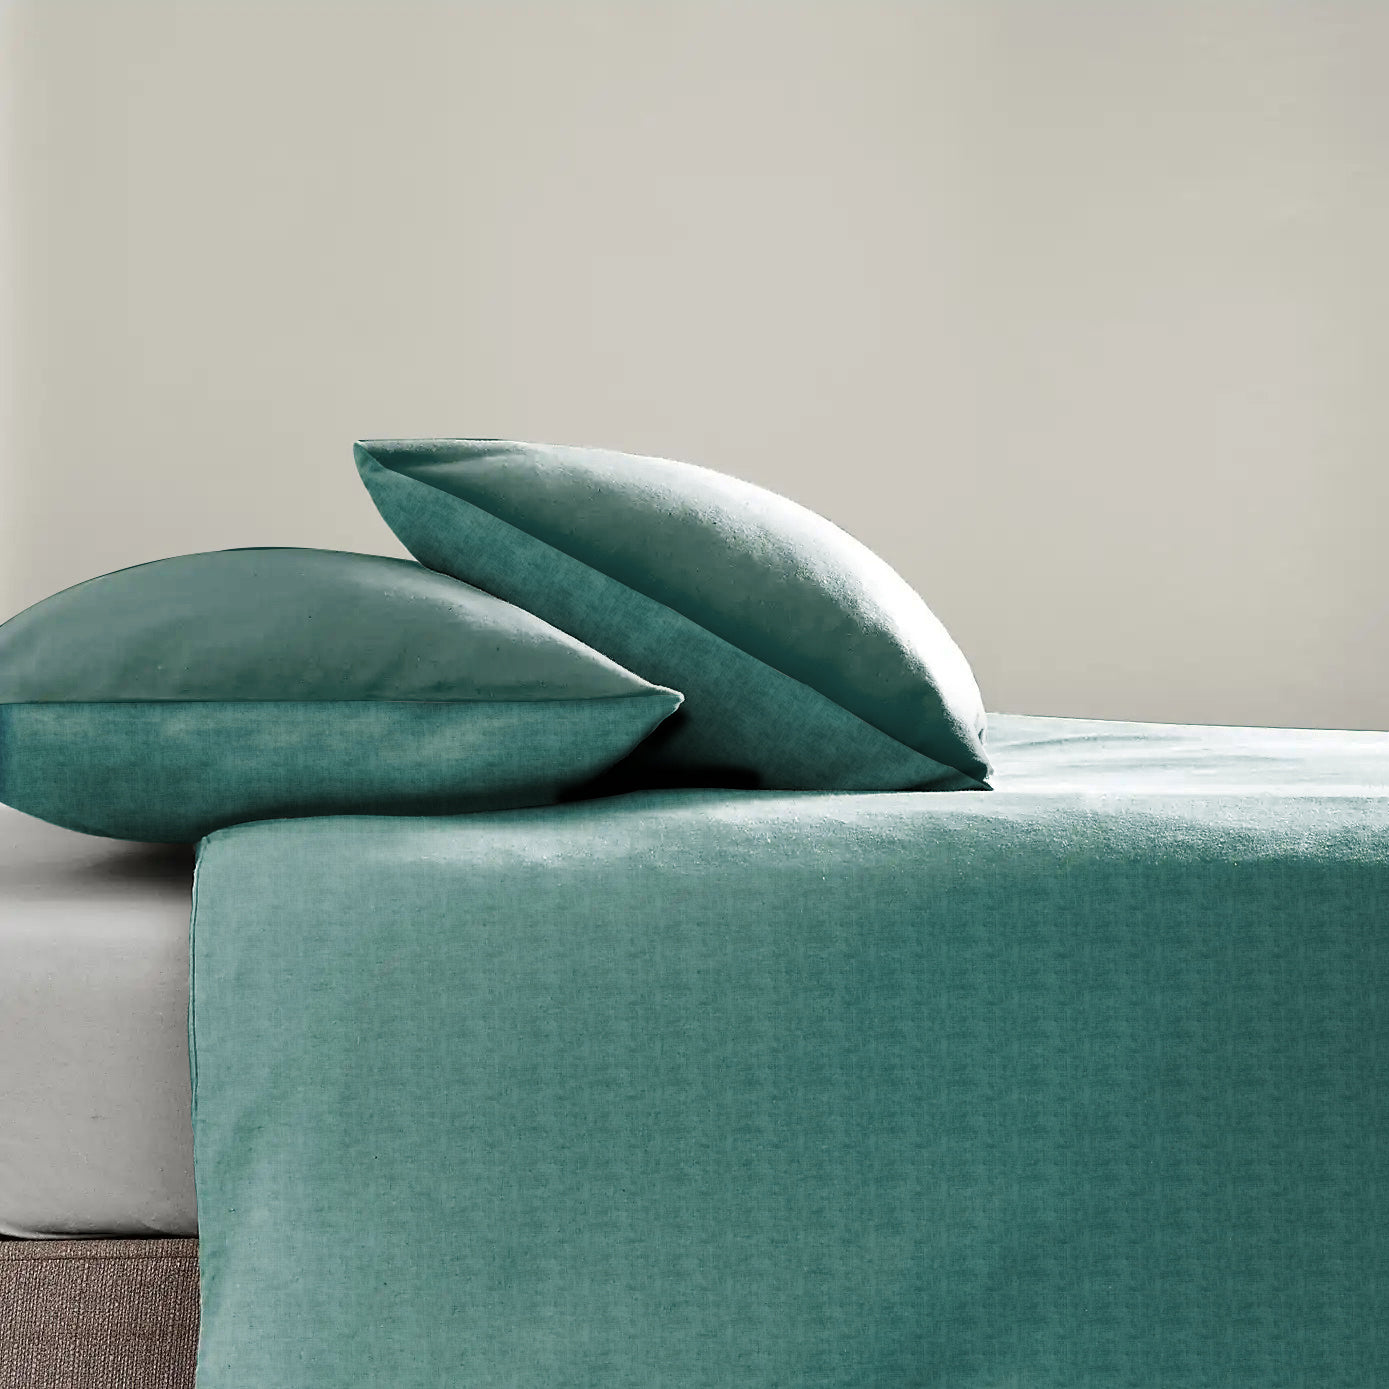 Jodhpur Texture Bedsheet for Double Bed with 2 PillowCovers King Size (104" X 90") Teal